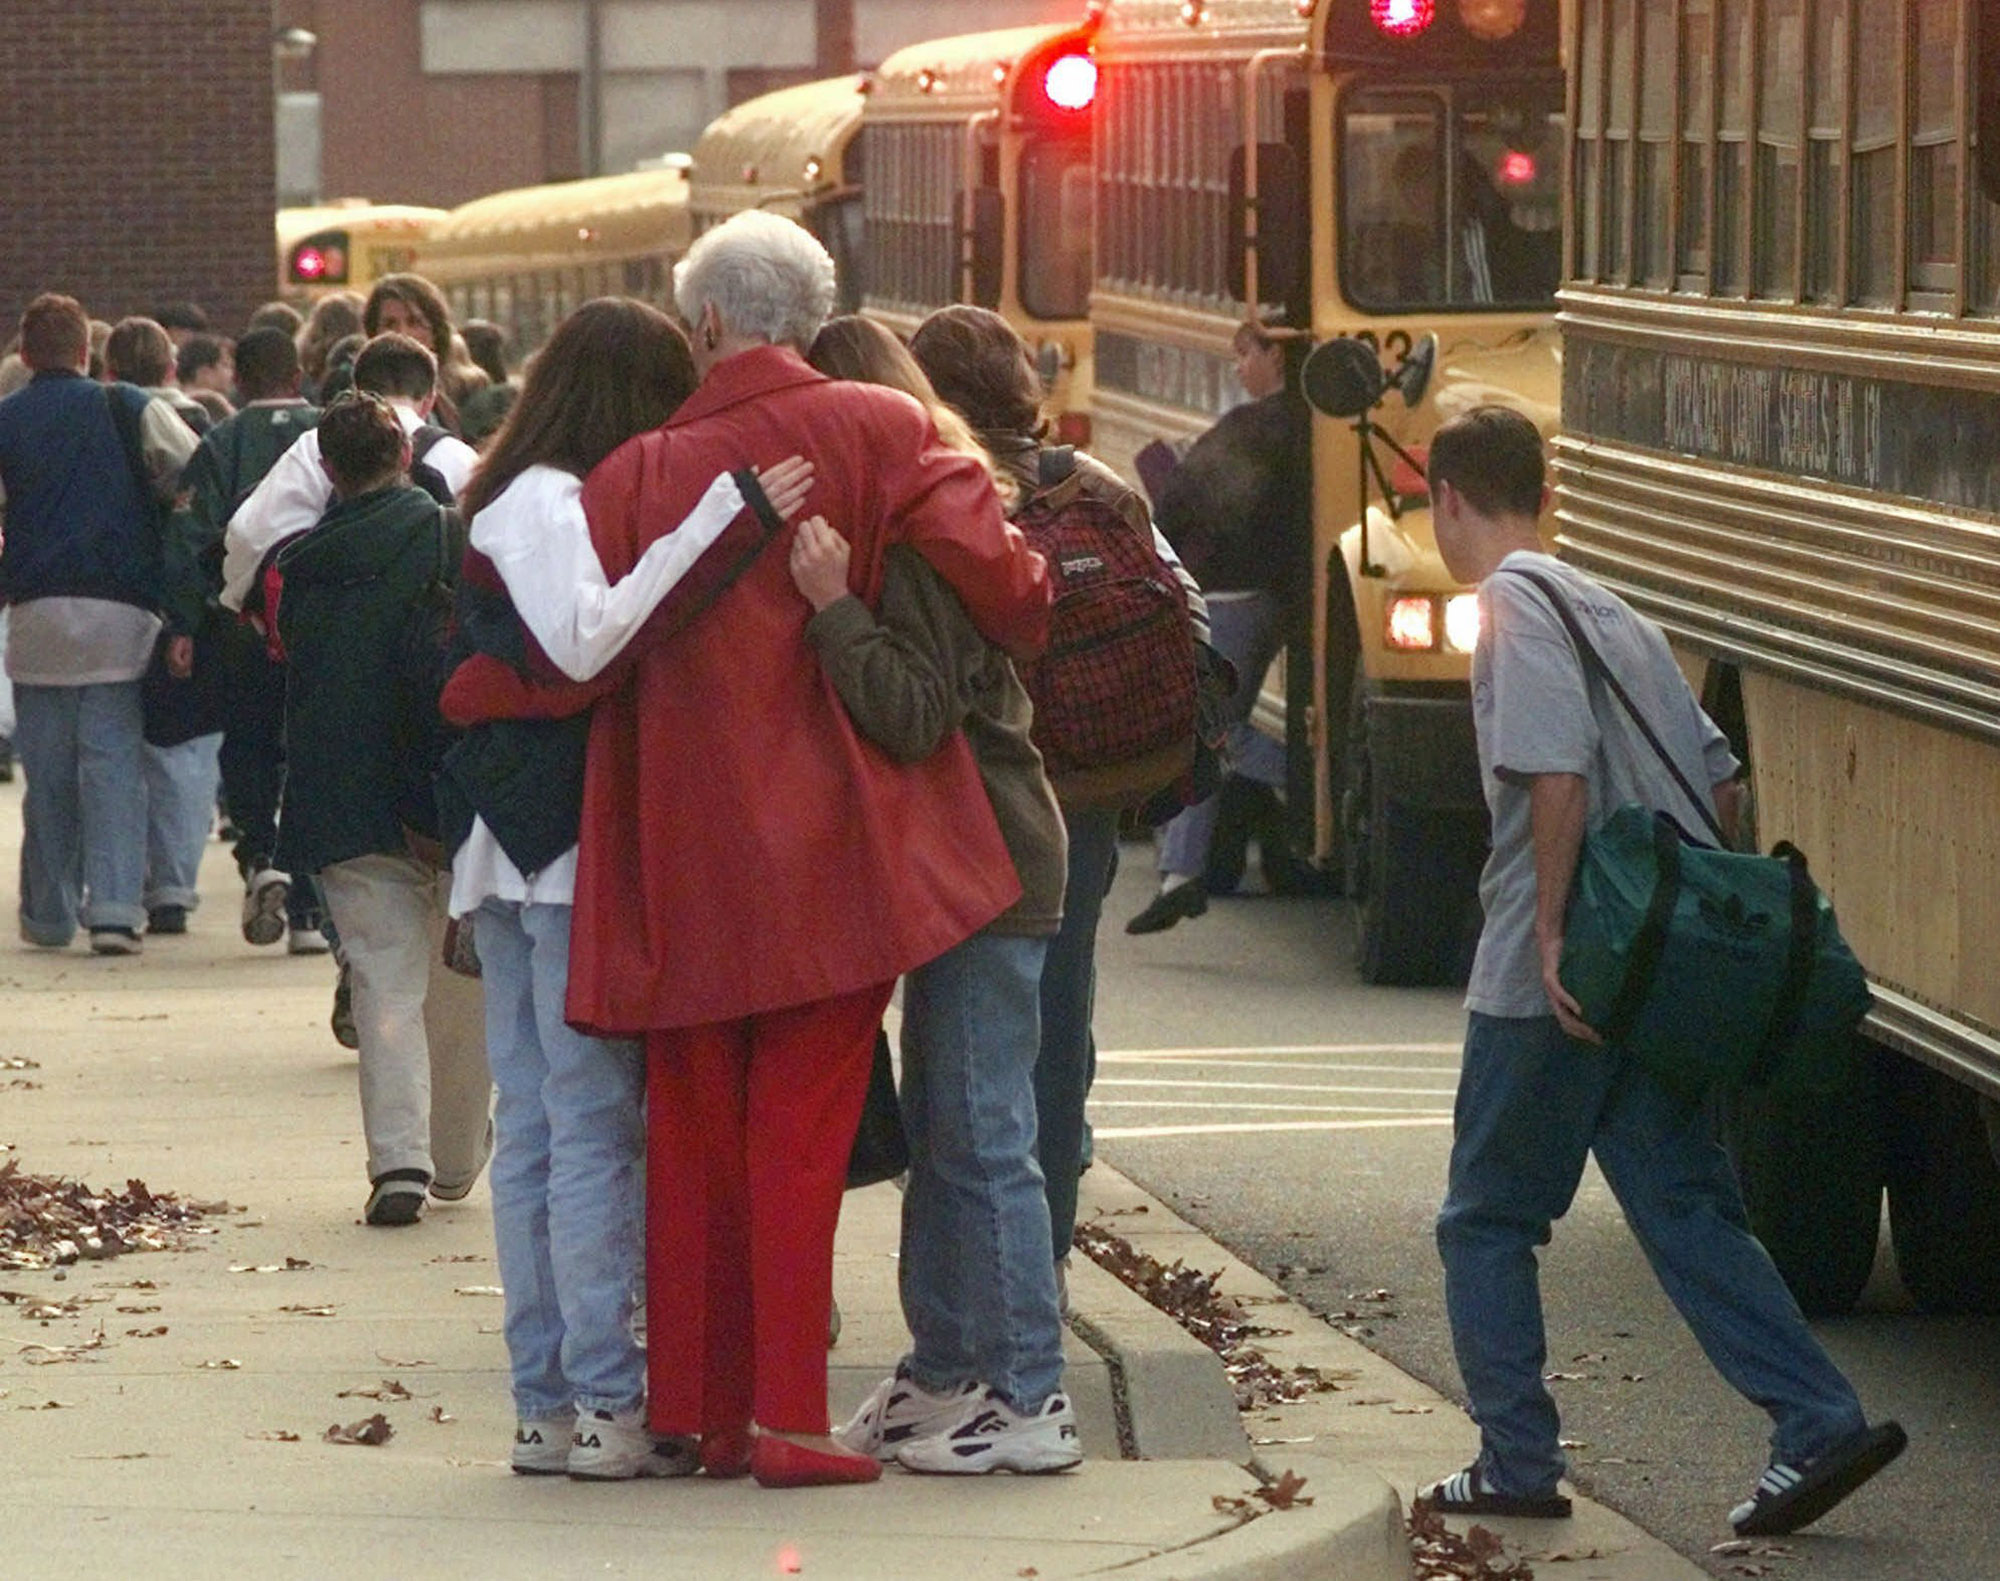 PHOTO: In this Dec. 2, 1997, file photo, students arriving at Heath High School in West Paducah, Ky., embrace an unidentified adult, after student Michael Carneal opened fire at the school the day before, leaving three students dead and five wounded.